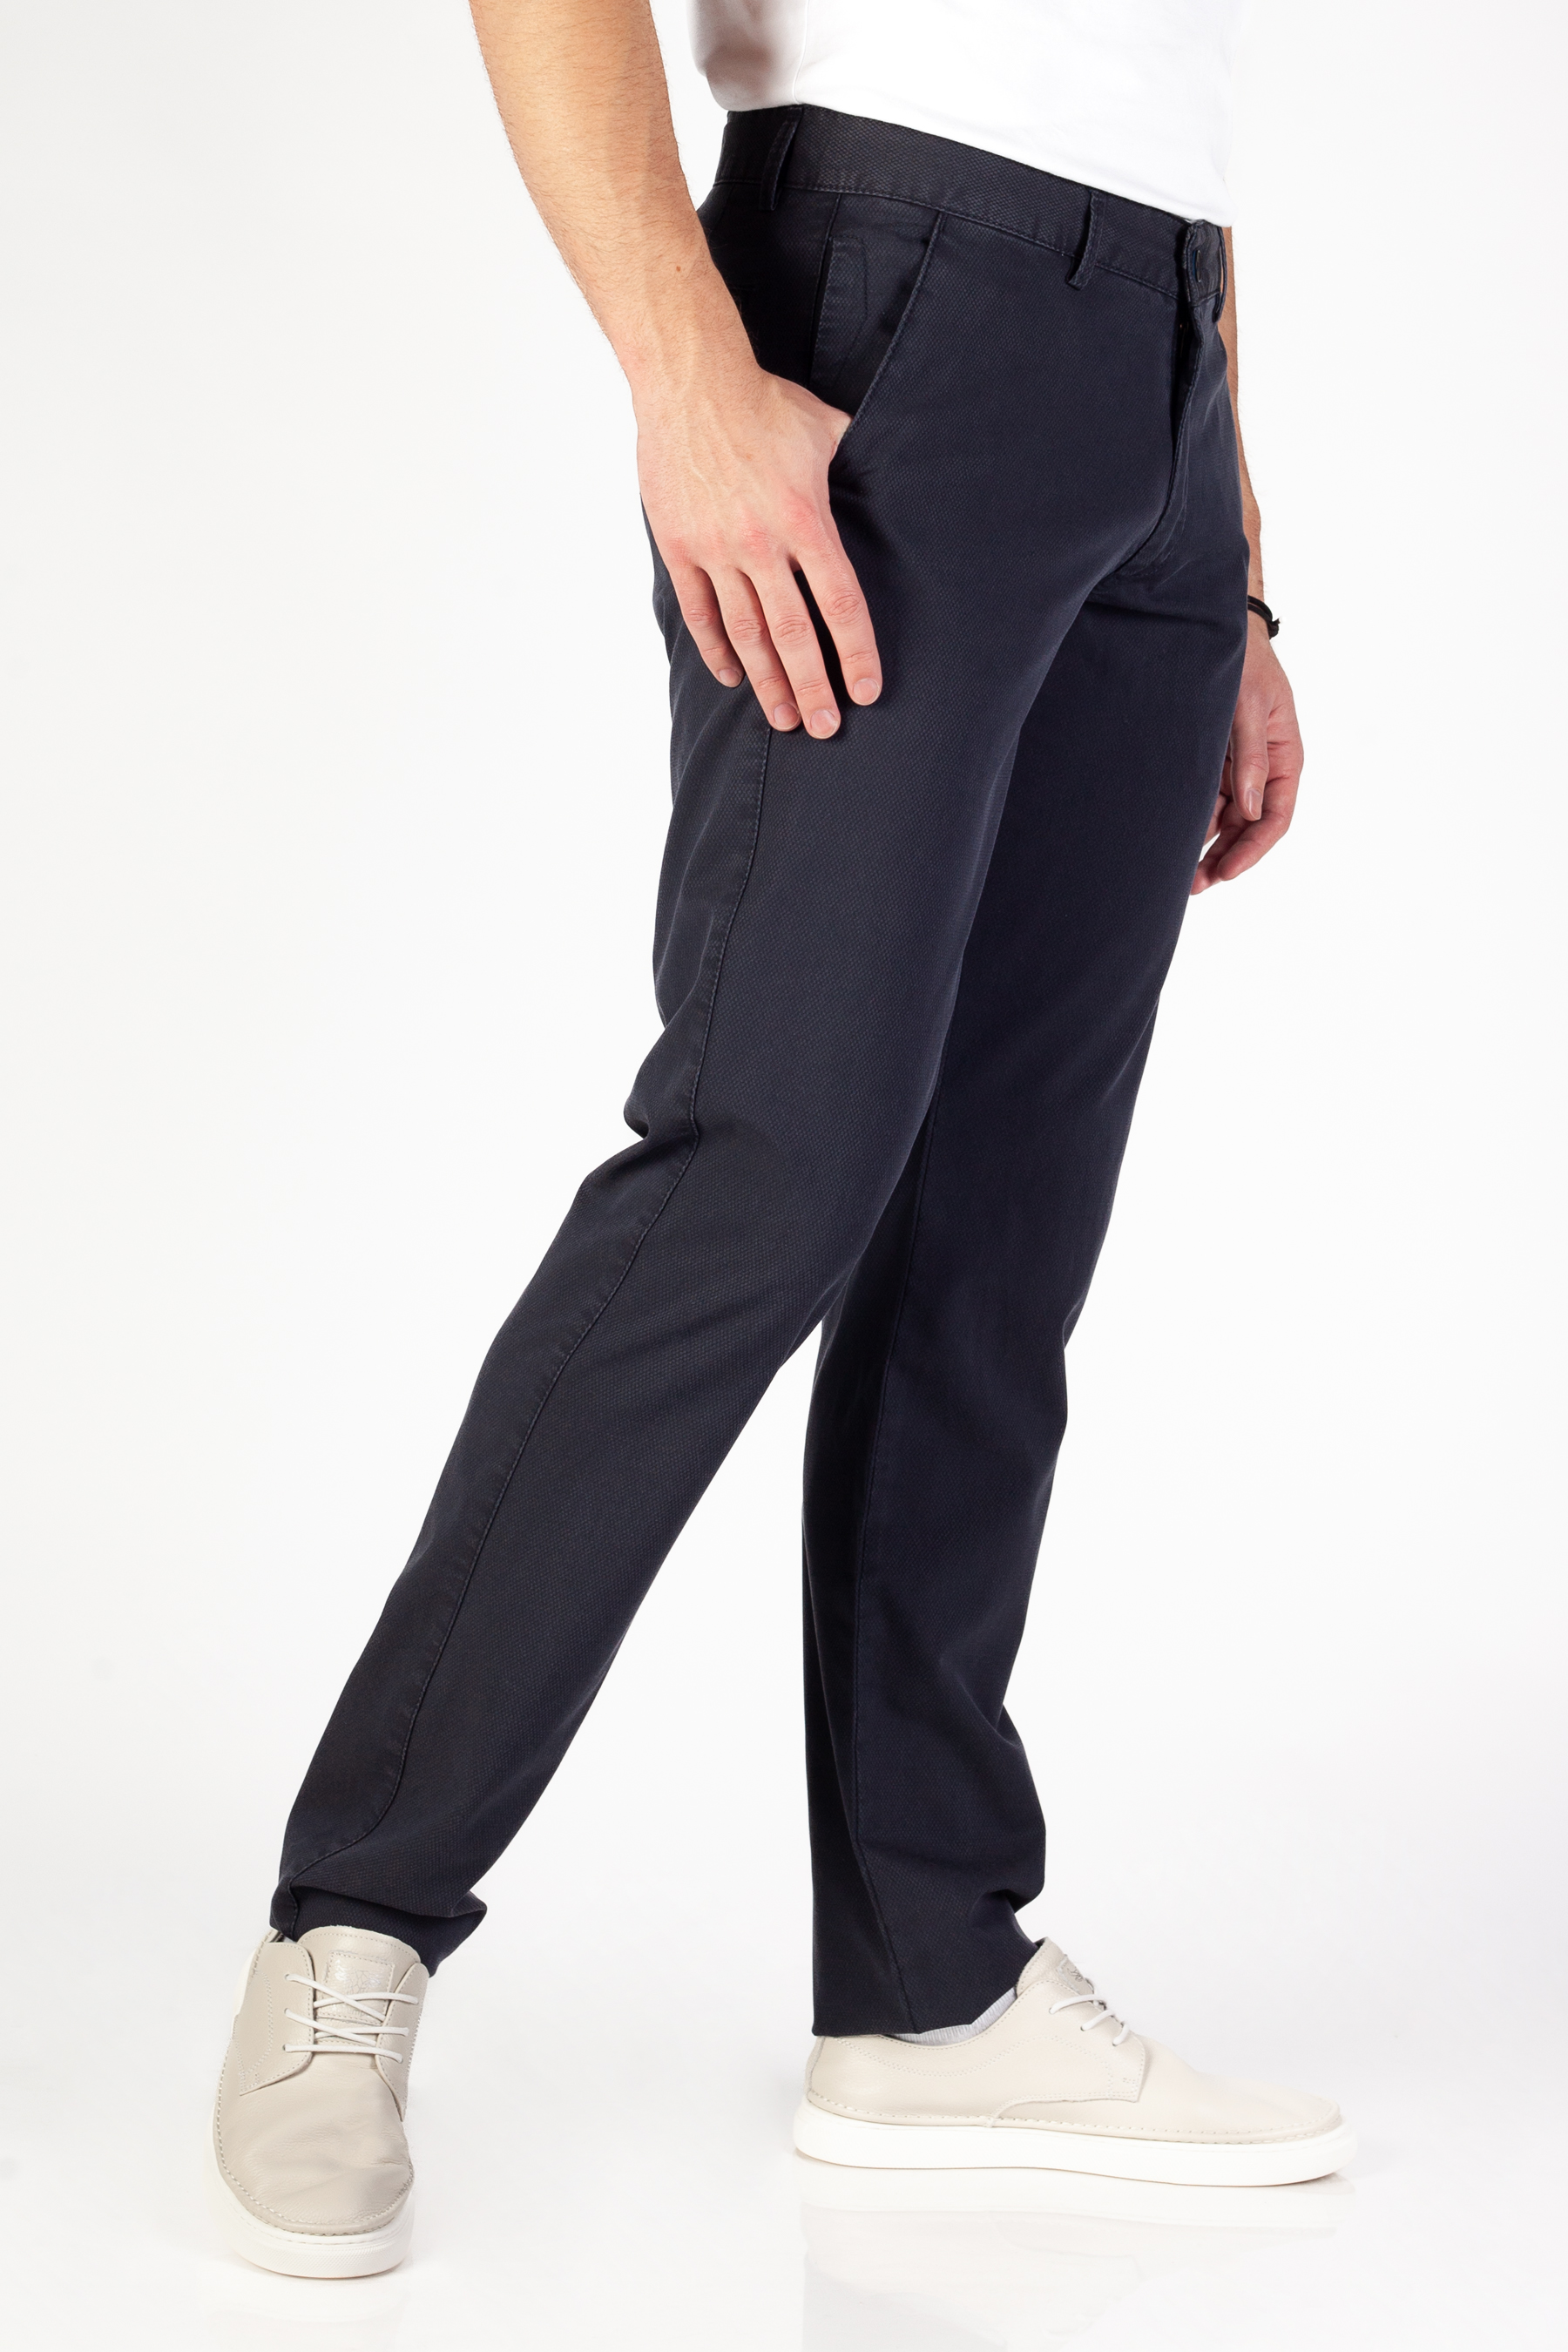 Chino pants BLK JEANS 8375-5133-104-206